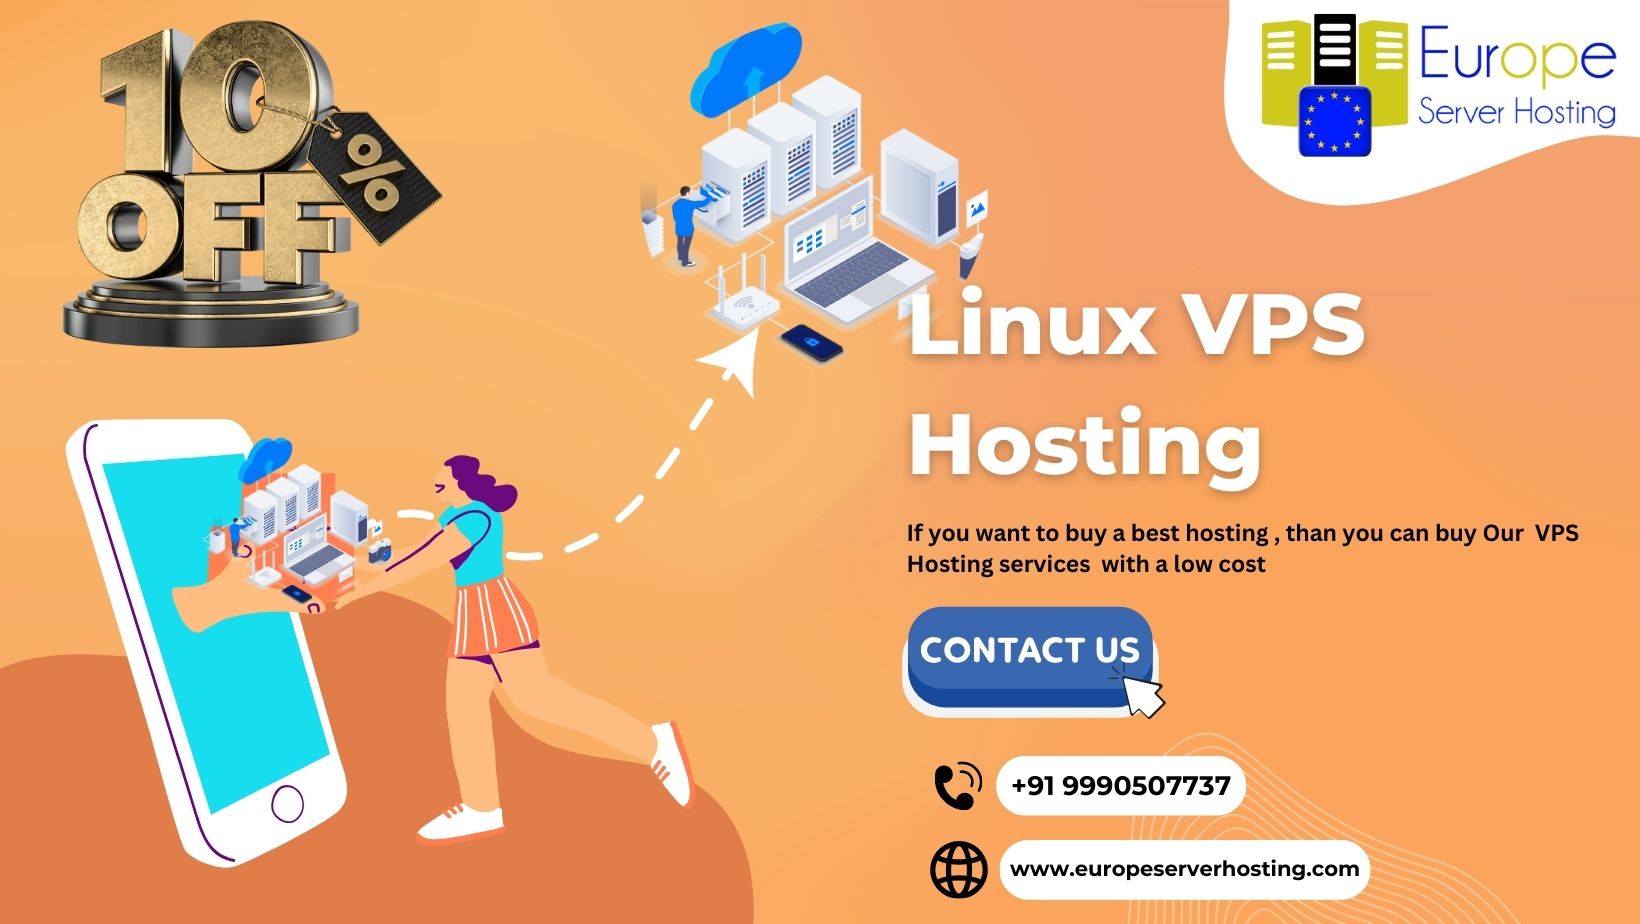 Linux VPS Hosting, also referred to as Virtual Private Server web hosting, is a hosting solution that mixes the energy and versatility of Linux running systems with the scalability of a digital private server.